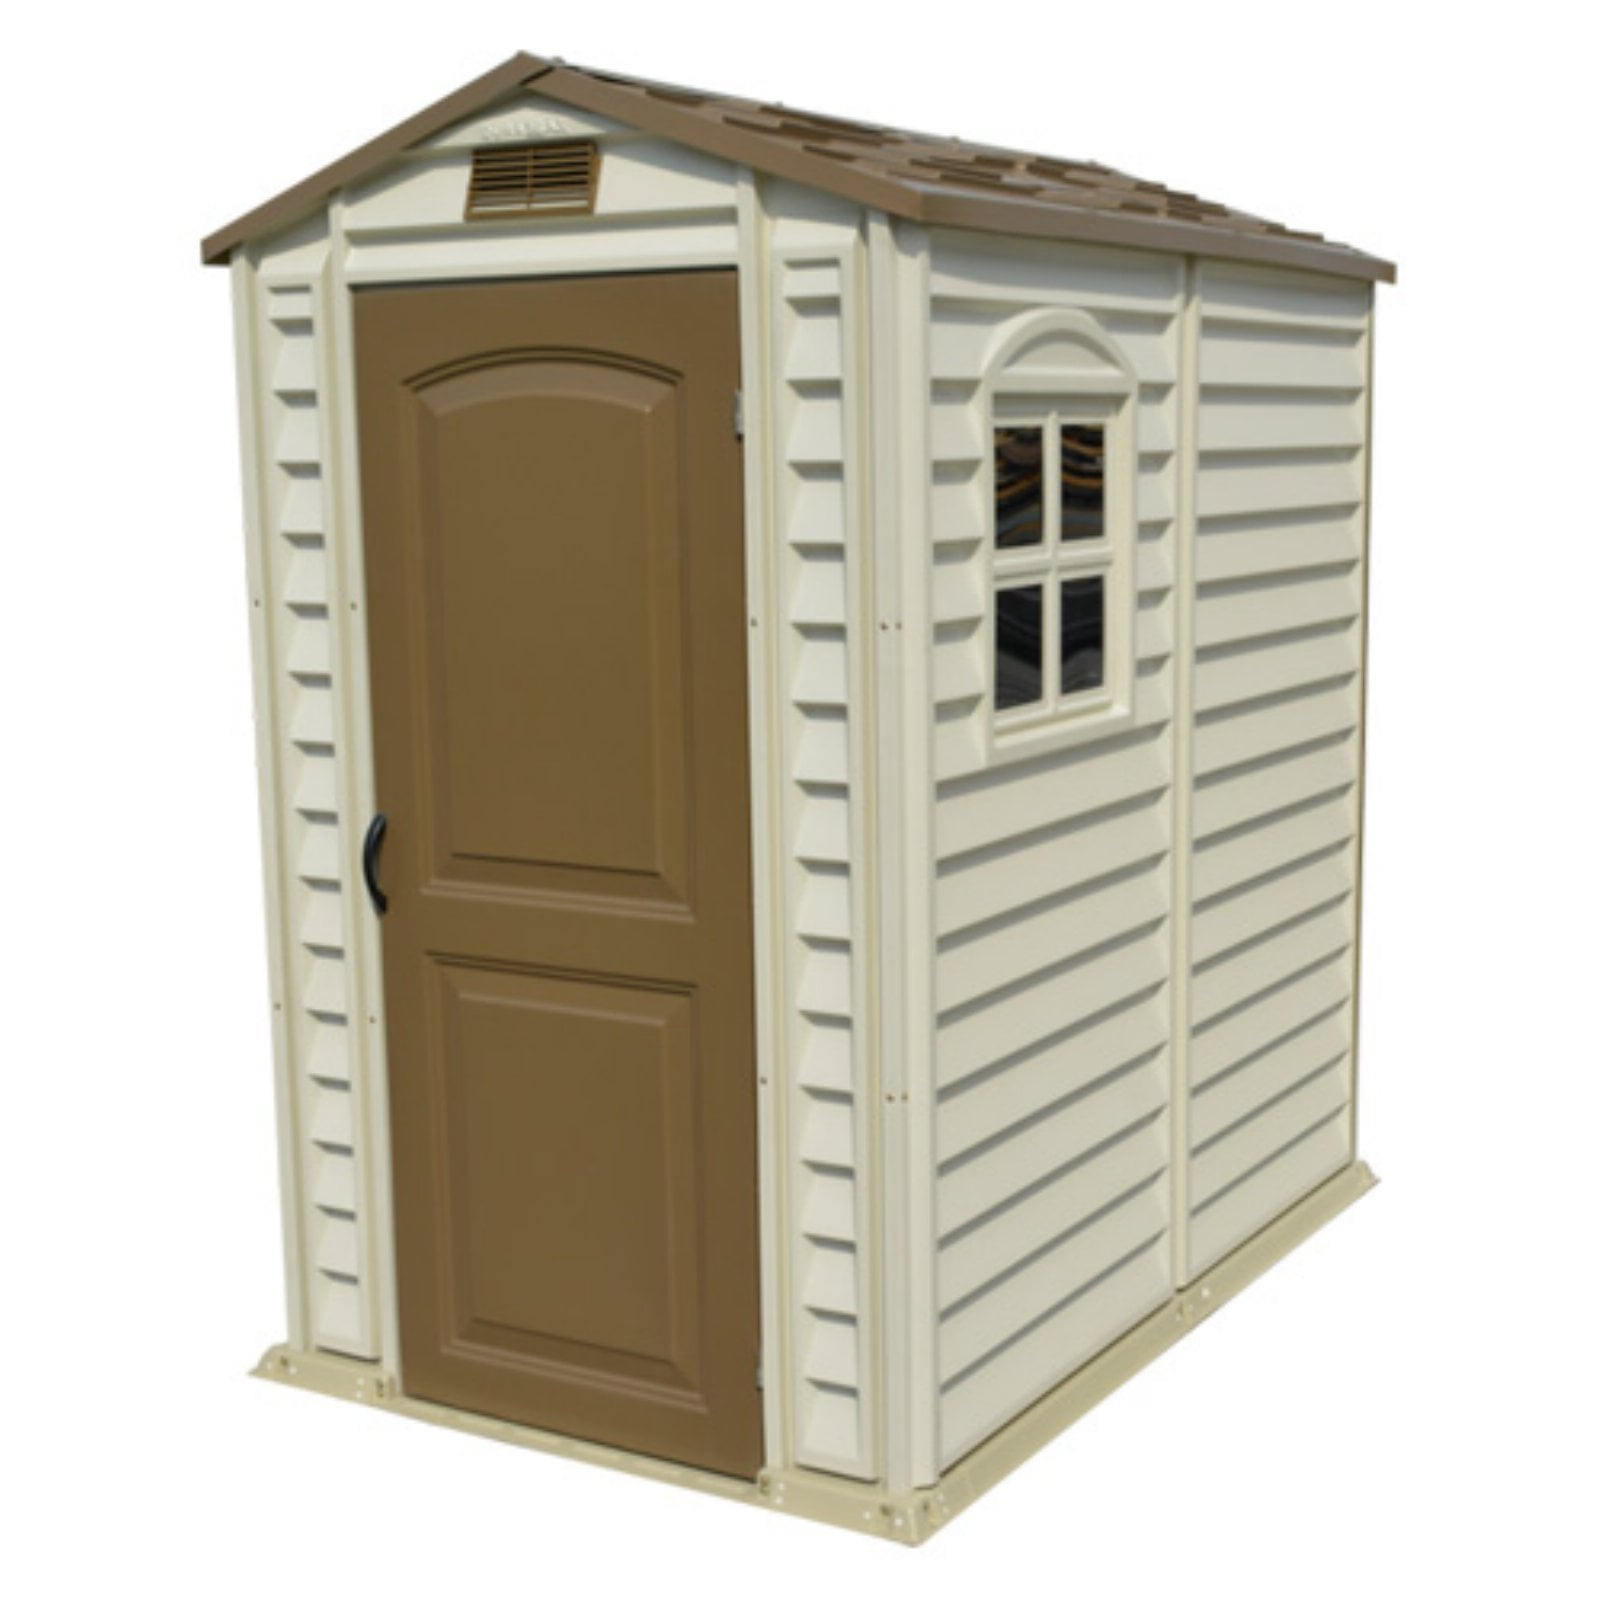 Duramax Building Products 4 x 6 ft. StorePro Storage Shed 